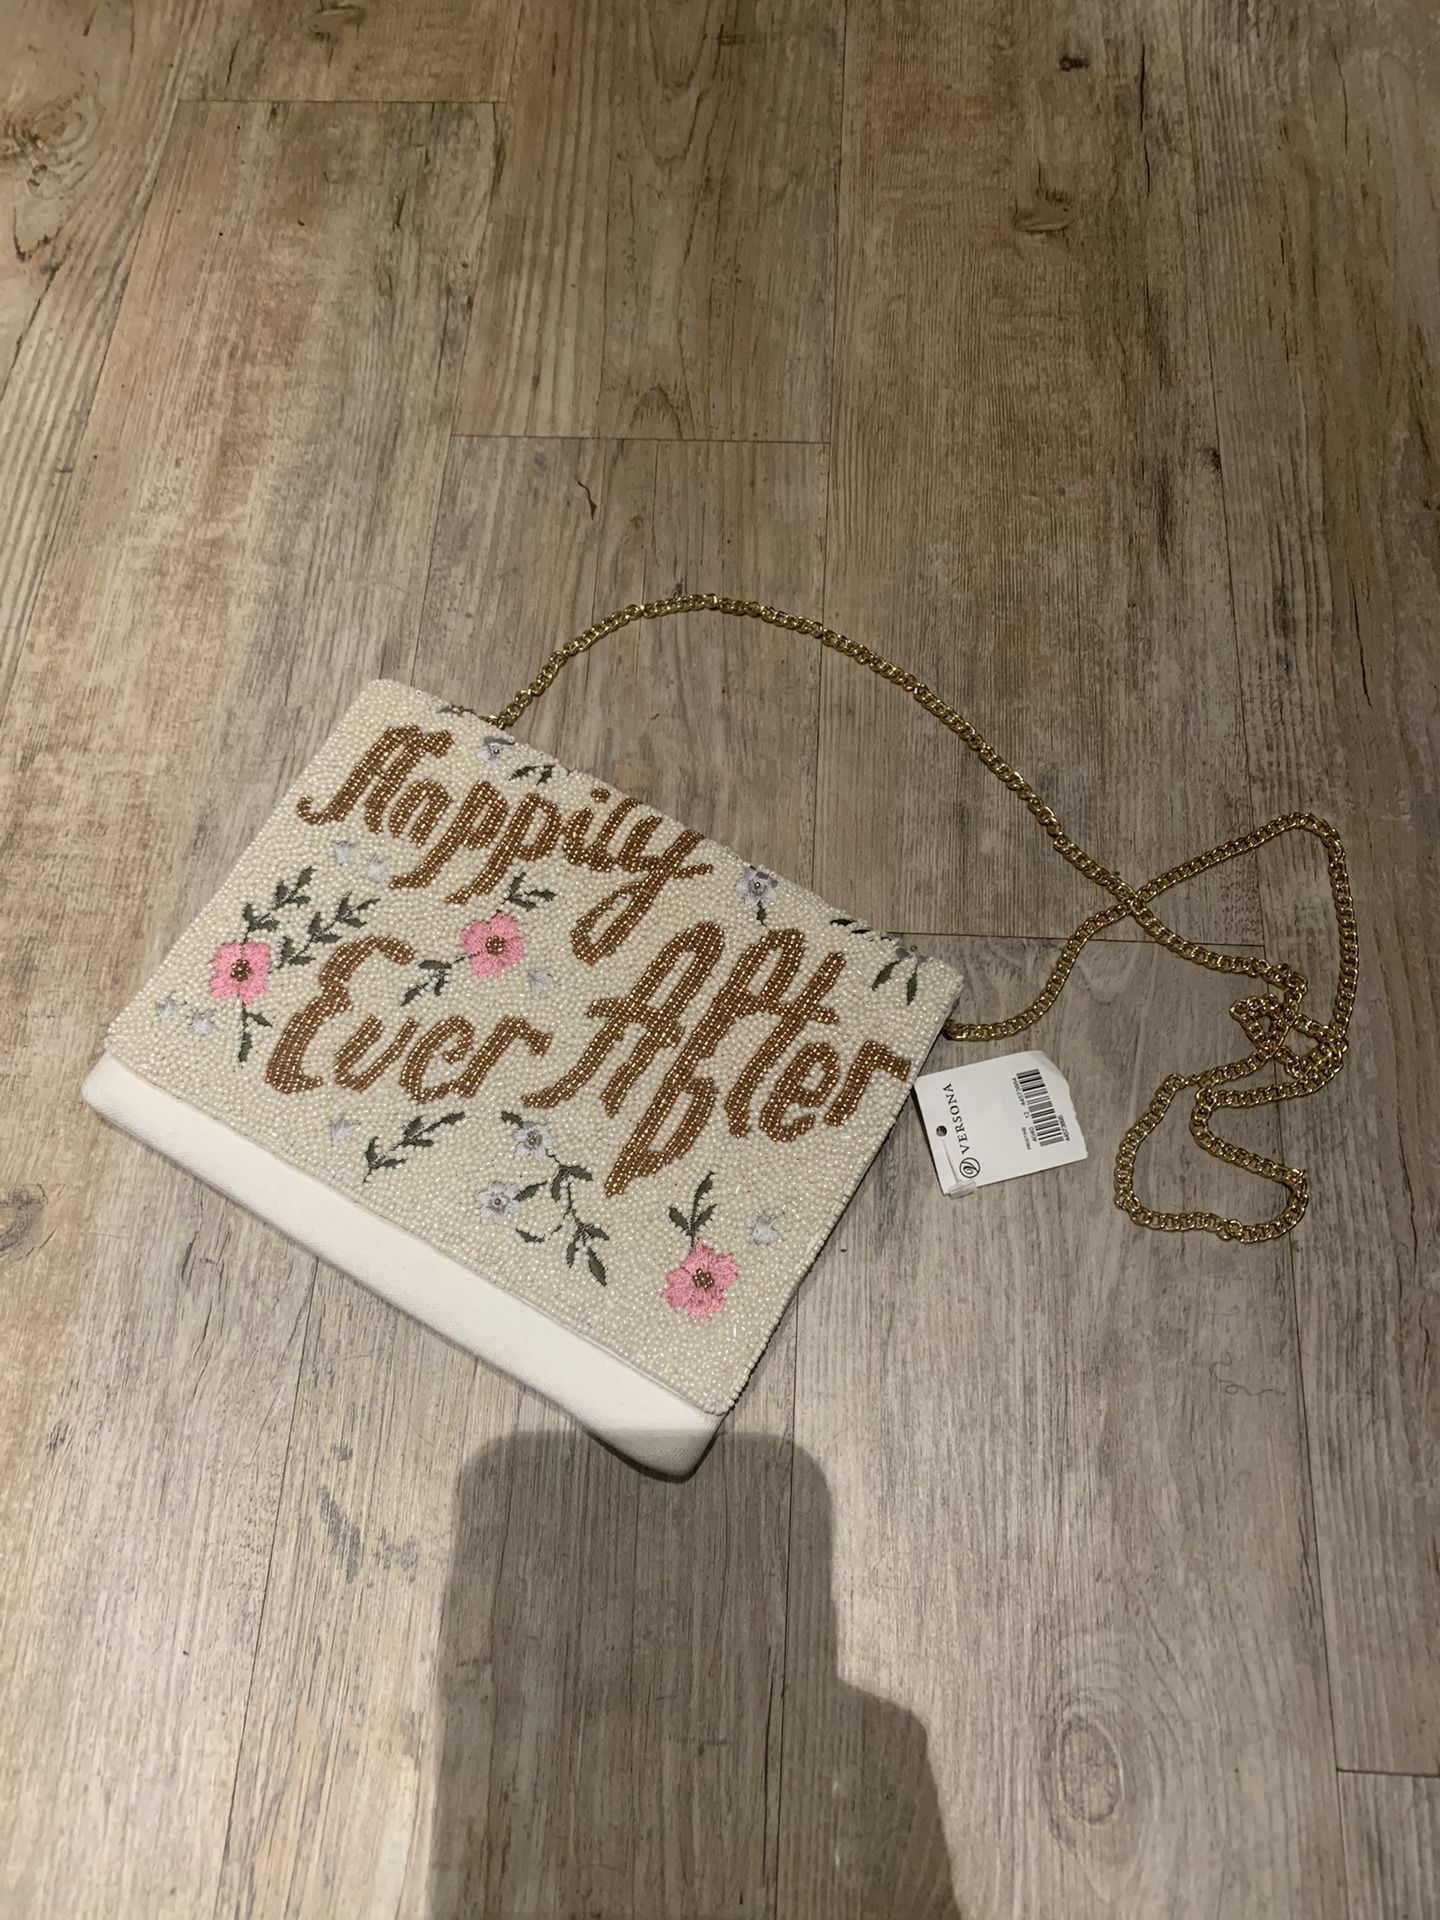 Happily Ever After Beaded Embroidered Clutch Crossbody Bag Bride Wedding